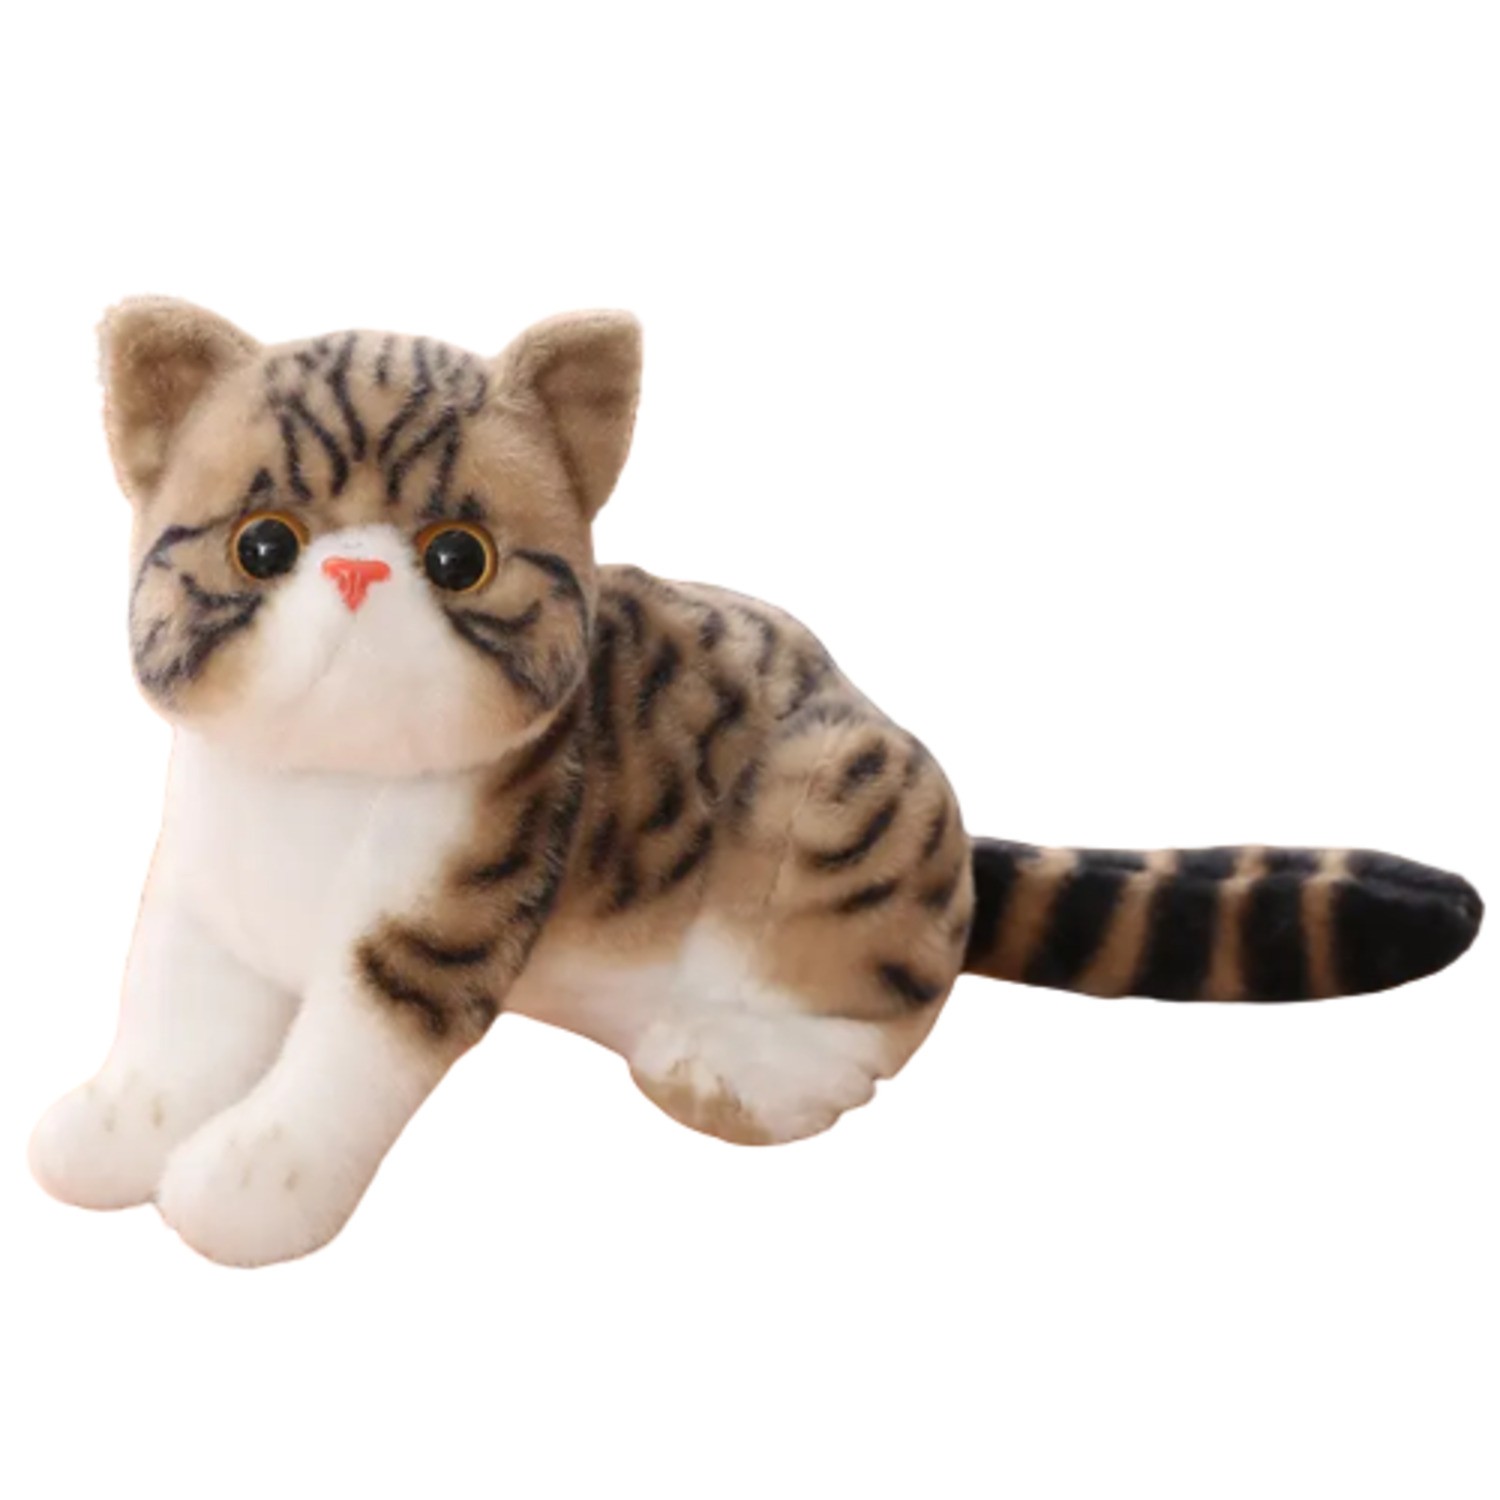 Huggable Chocolate color Cat soft Toy with meow sound - Pack of 1 - 30 cm